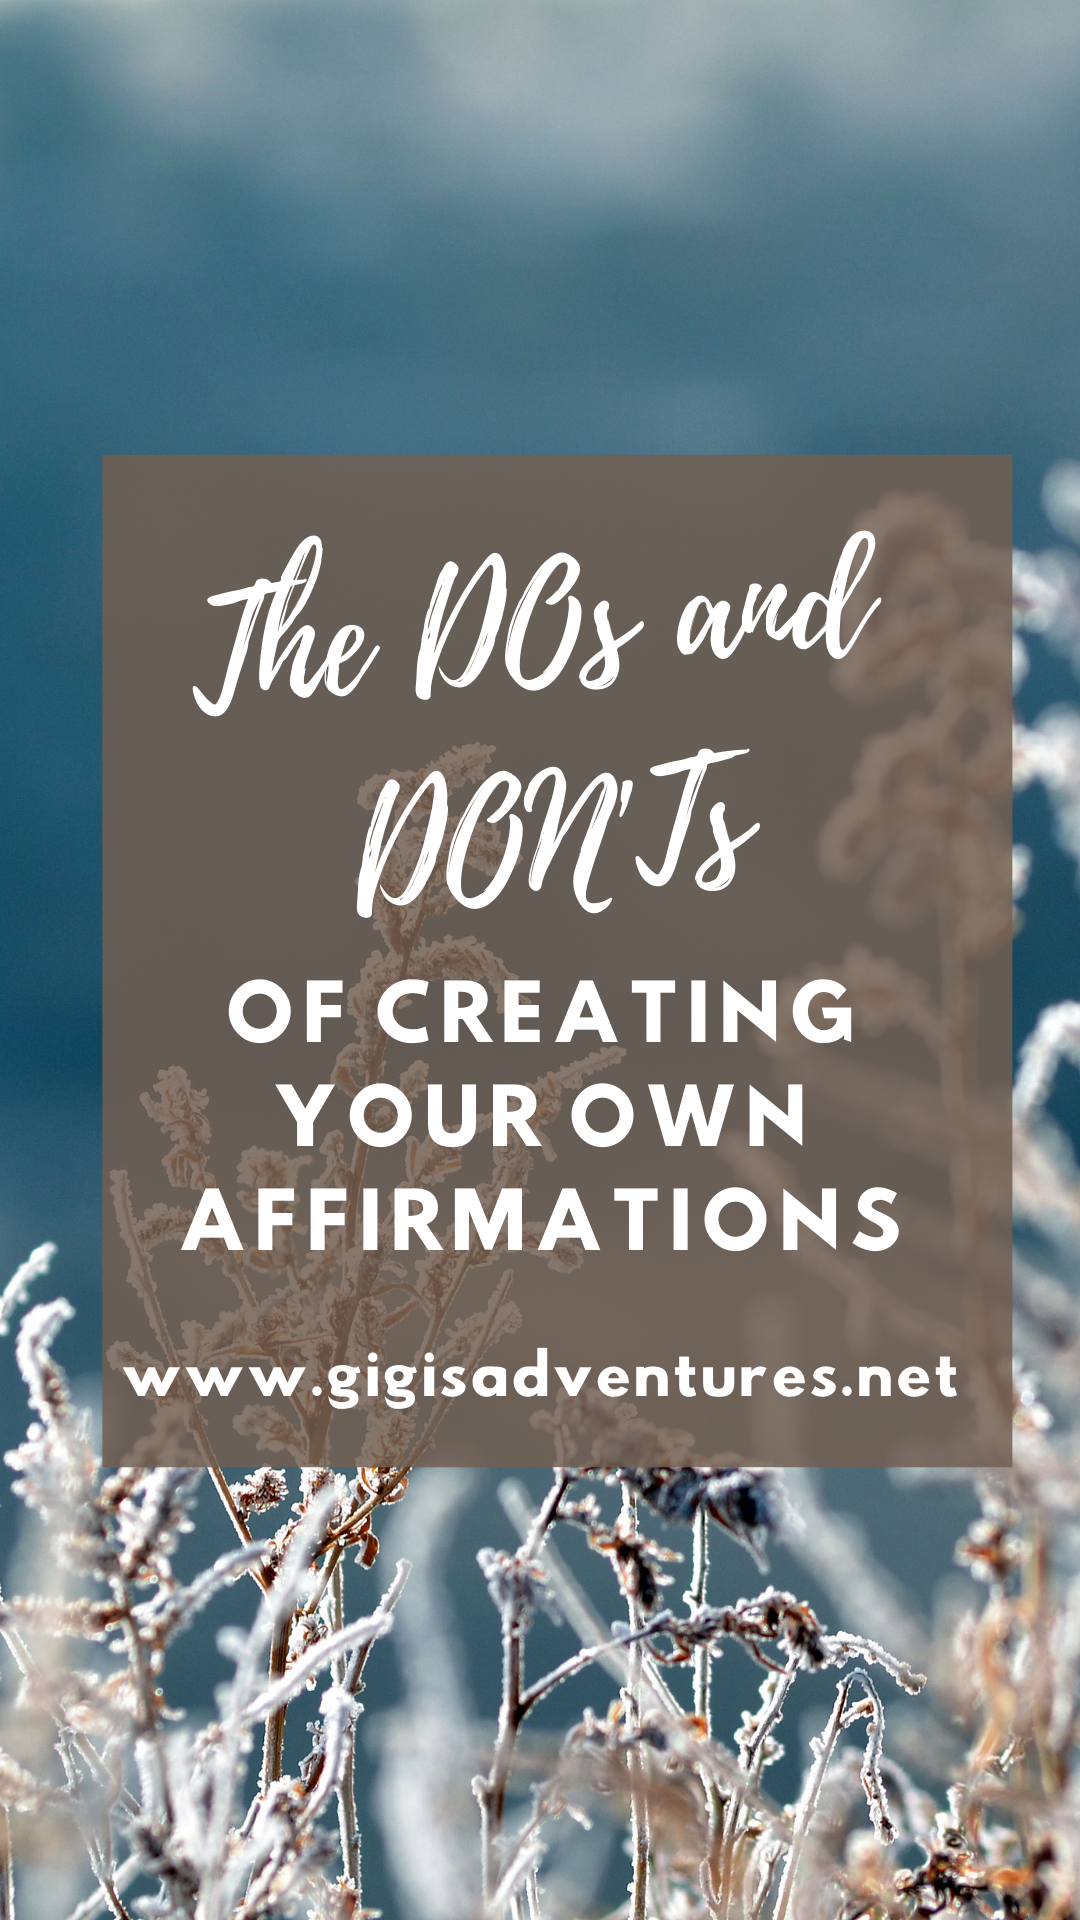 The DOs and DON'Ts Of Creating Your Own Affirmations